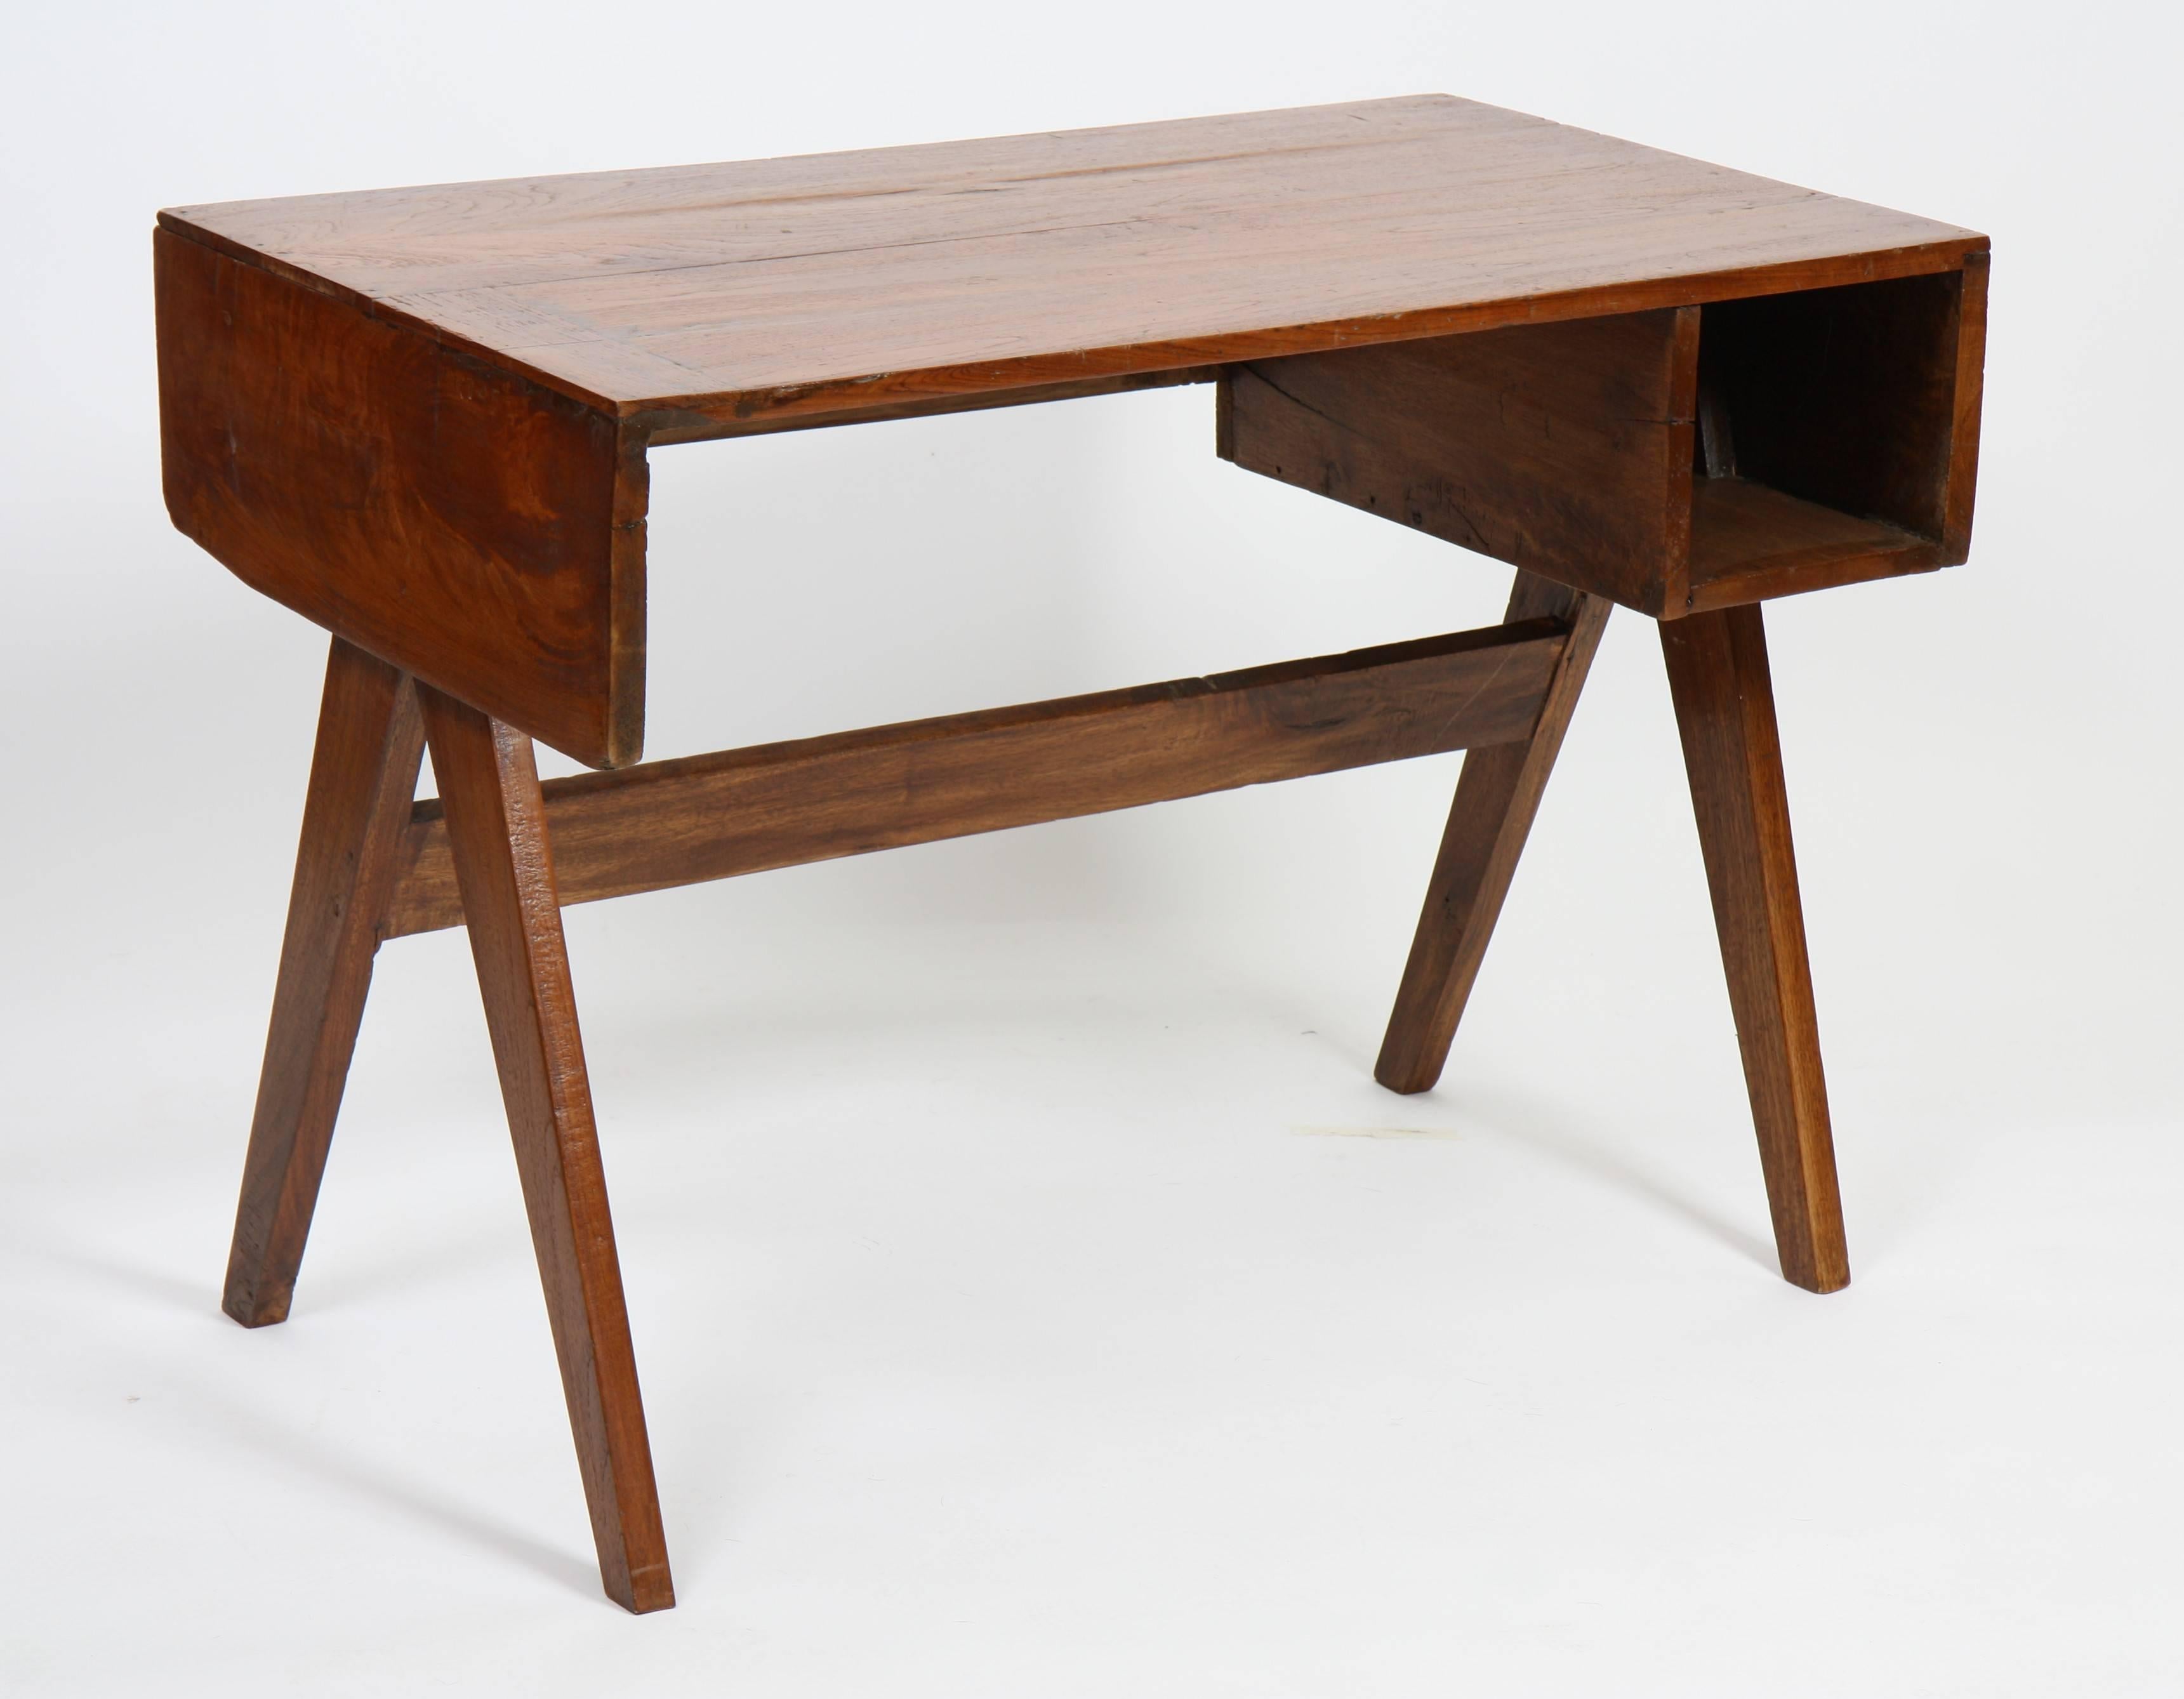 Pierre Jeanneret.
Office solid desk in teak and teak veneer.
Rectangular tray with sides and drooping supported by a double base